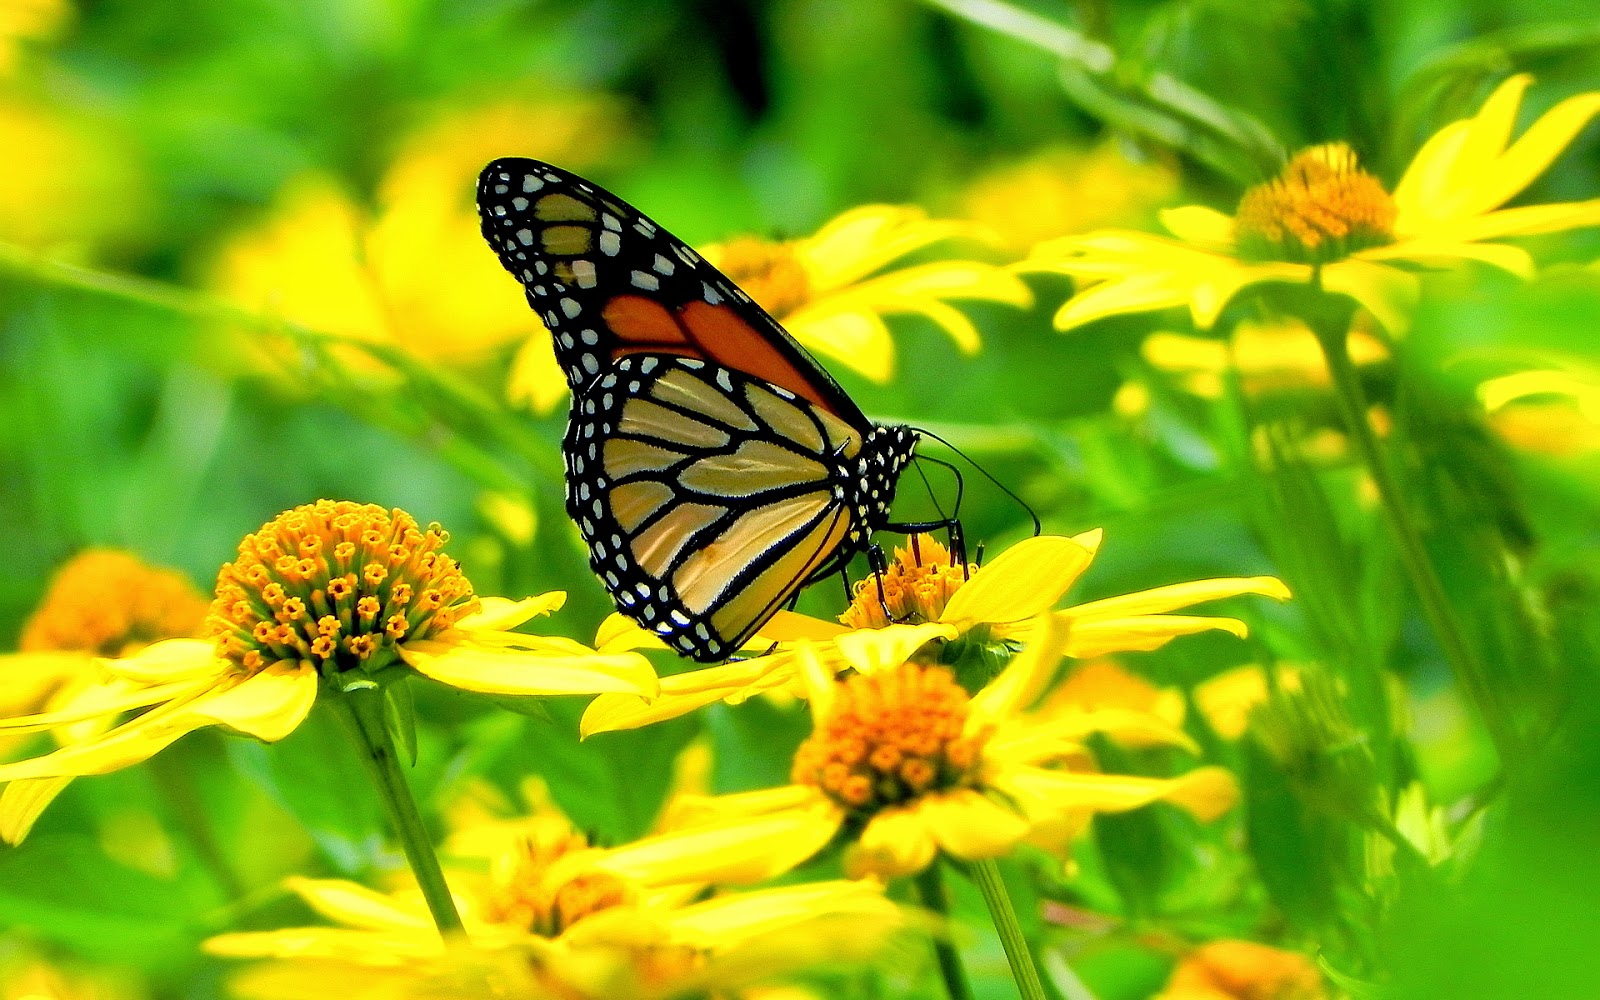 yellow flowers and butterflies exciting